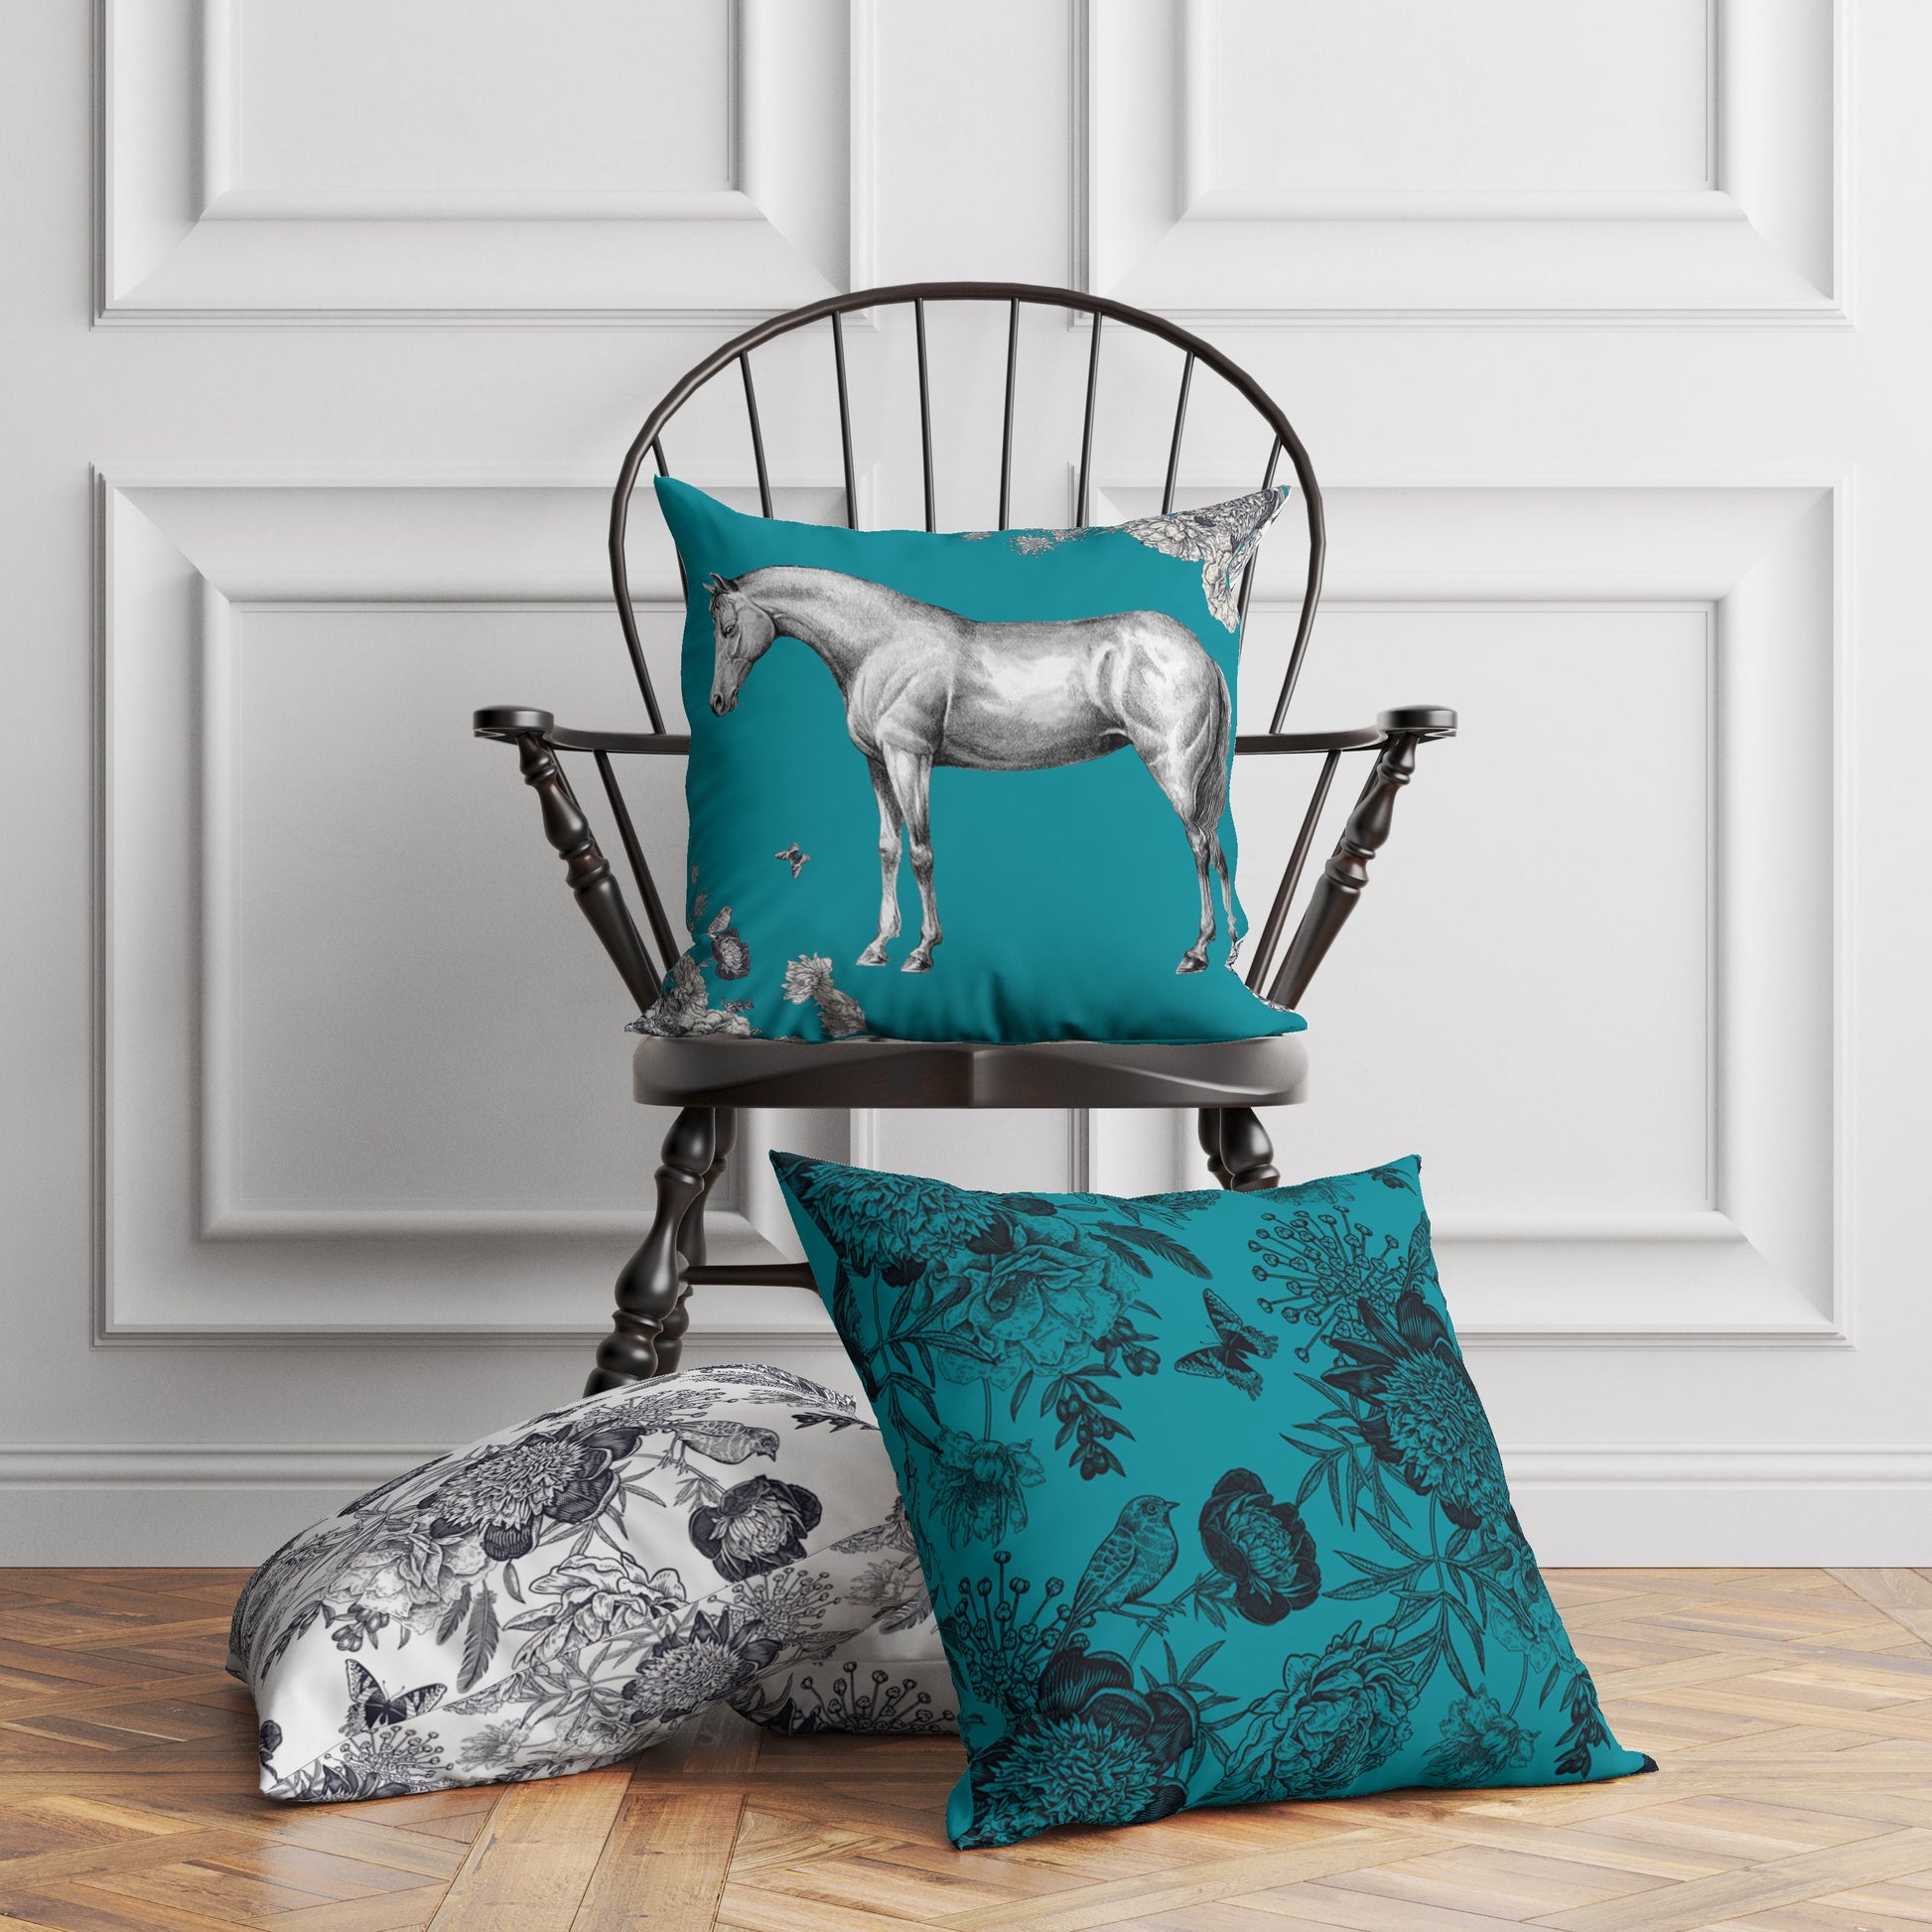 A DAY IN THE COTSWOLDS PILLOW COVER IN TEAL - Middy N' Me